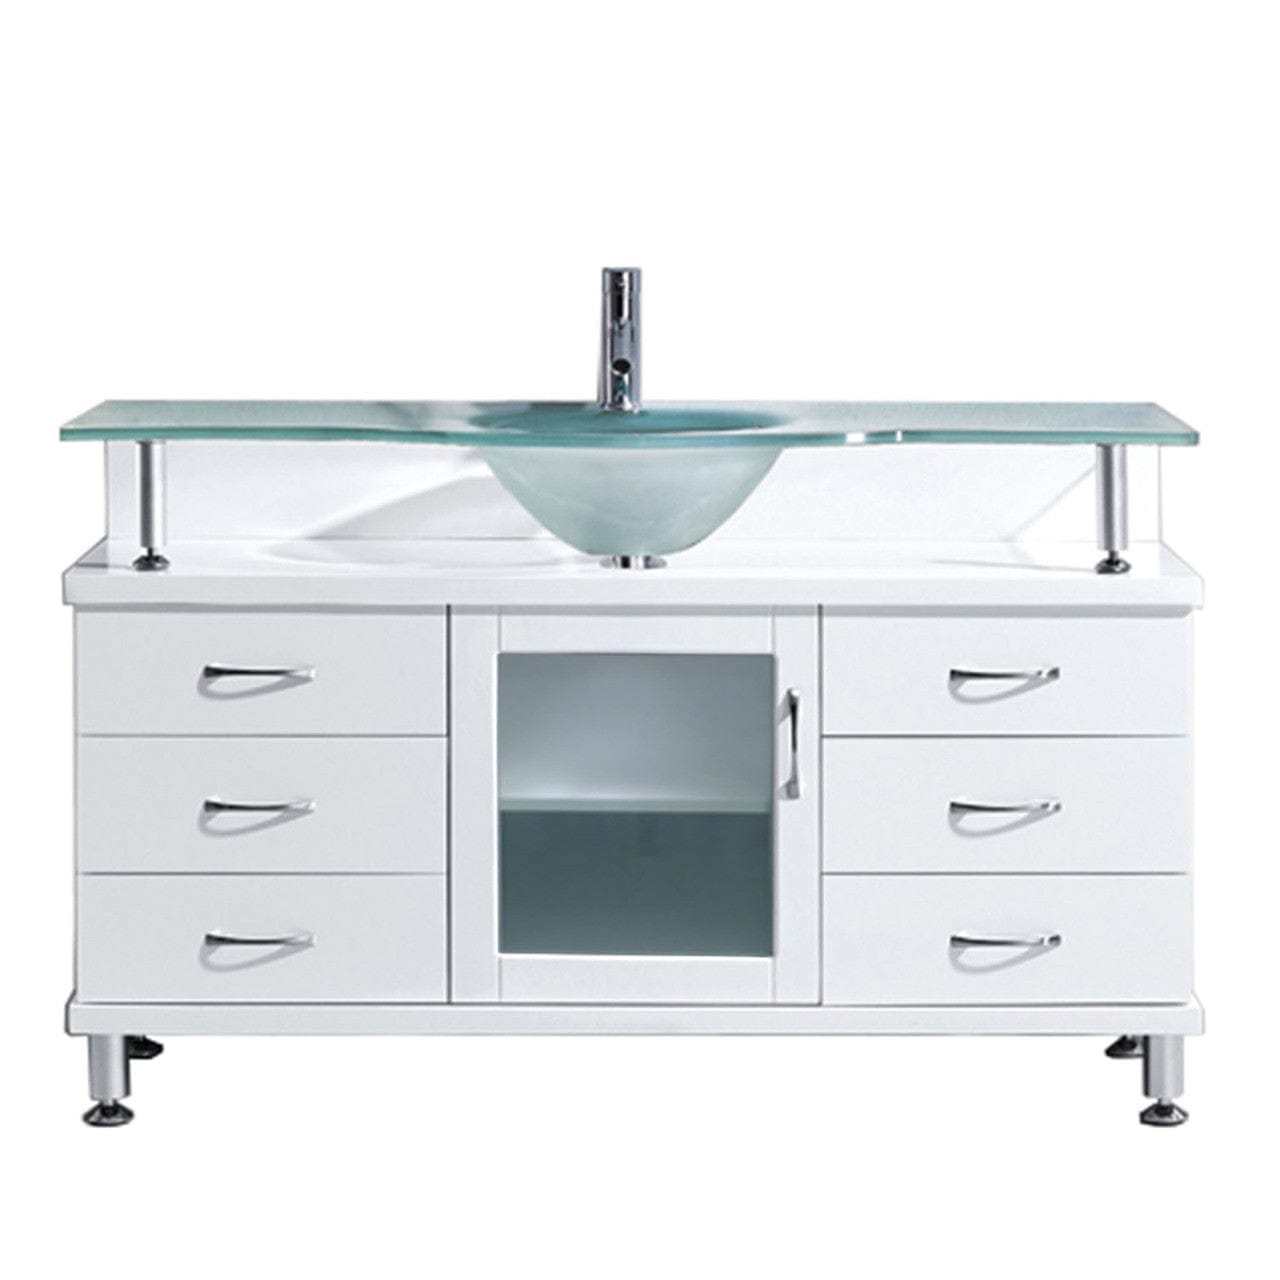 Virtu USA Vincente 55" Single Bathroom Vanity in White w/ Frosted Tempered Glass Counter-Top